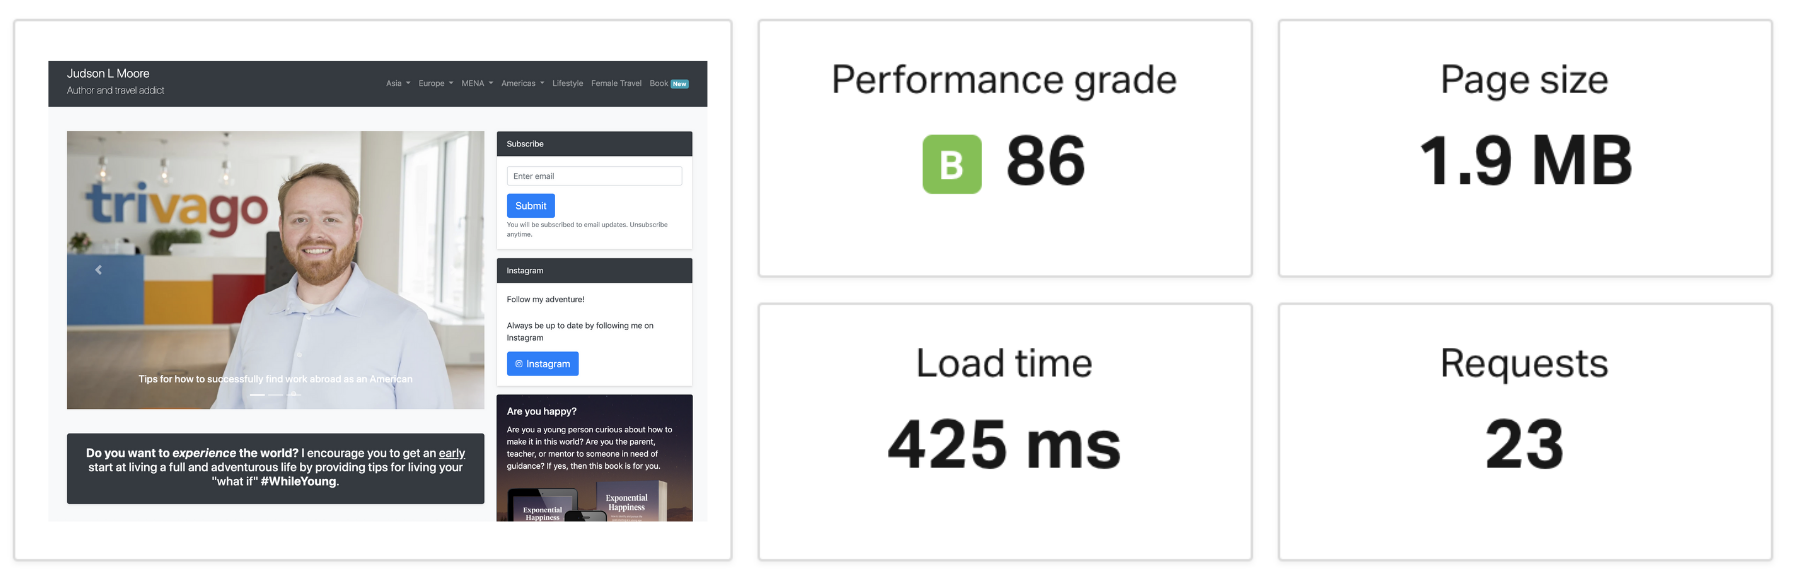 Pingdom Website Speed Test of JudsonLMoore.com while hosted on AWS with Jekyll after optimizations